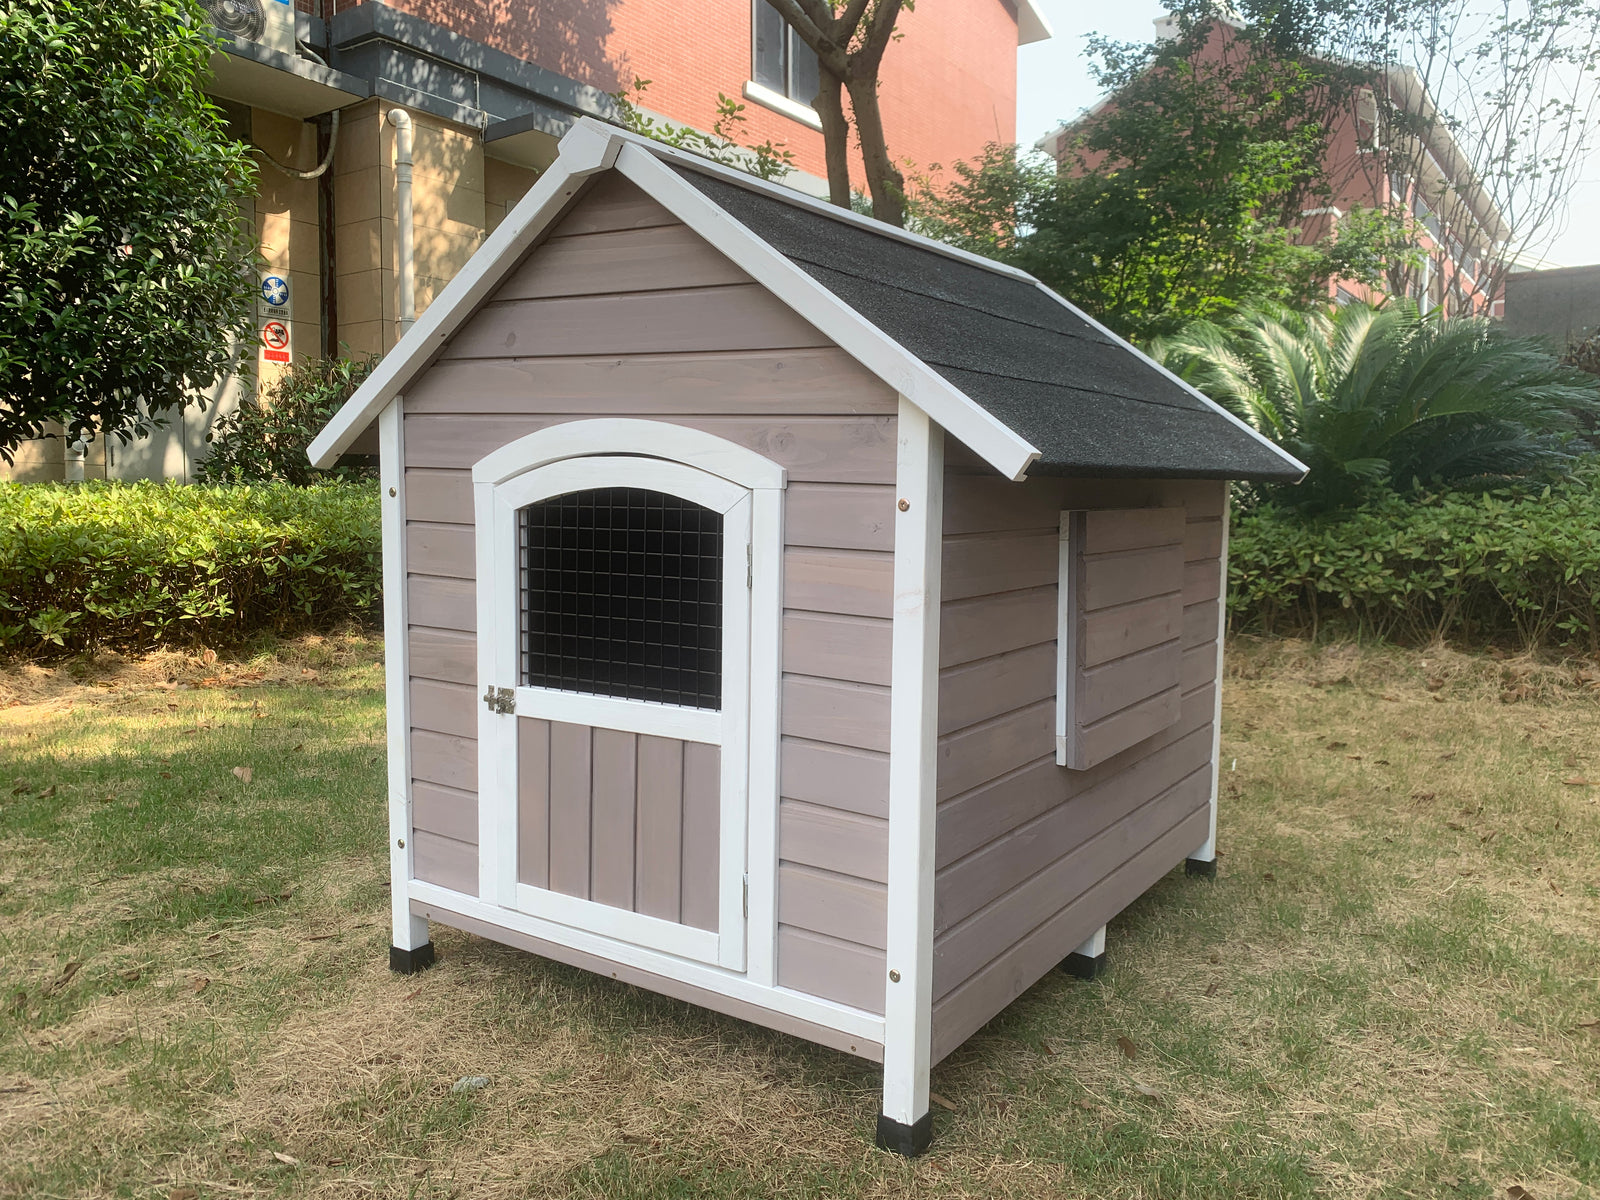 YES4PETS XL Timber Pet Dog Kennel House Puppy Wooden Timber Cabin With Door Grey